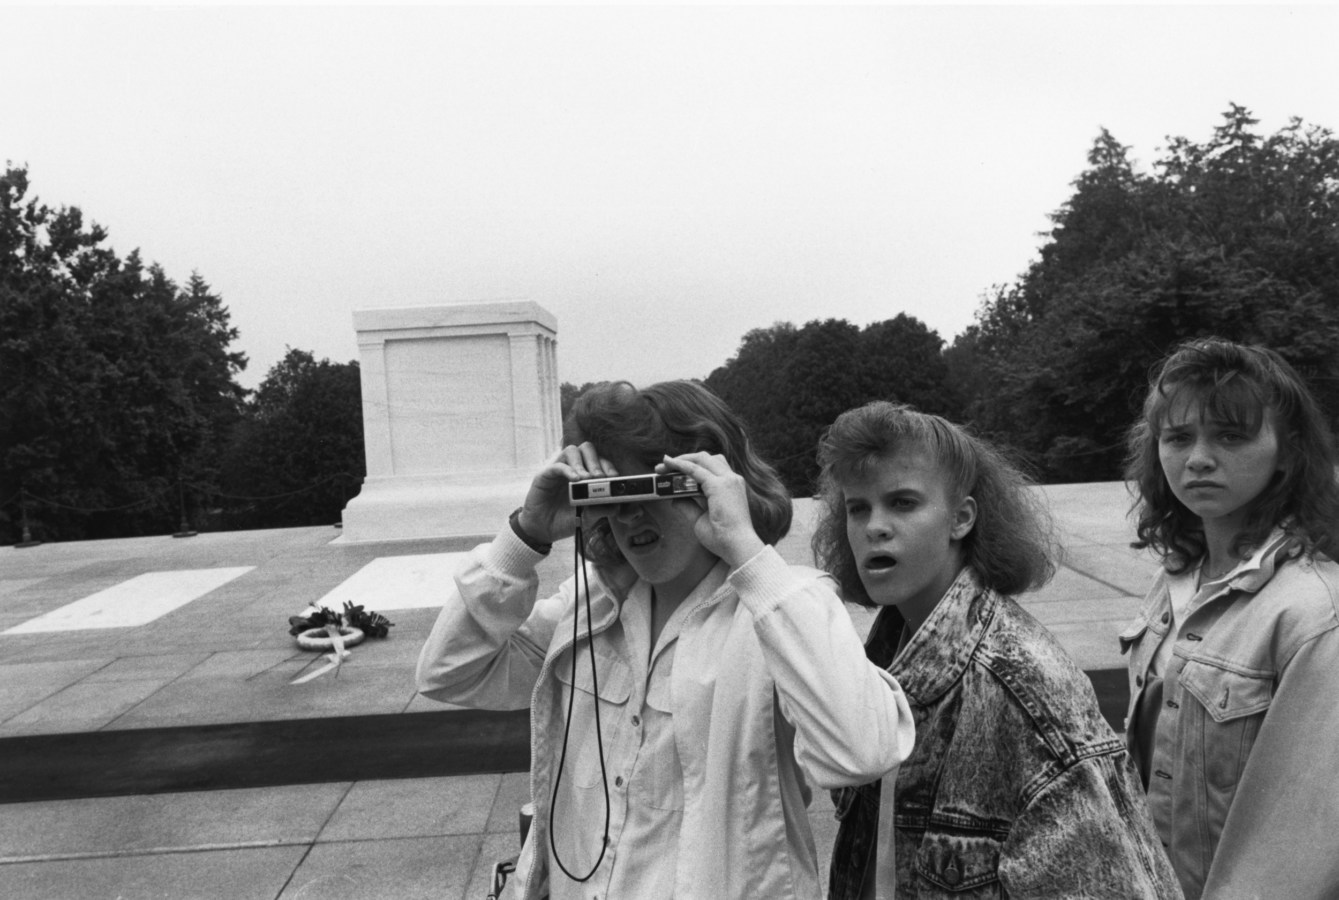 Black and white photograph of three young women in front of a stone memorial taking a photograph